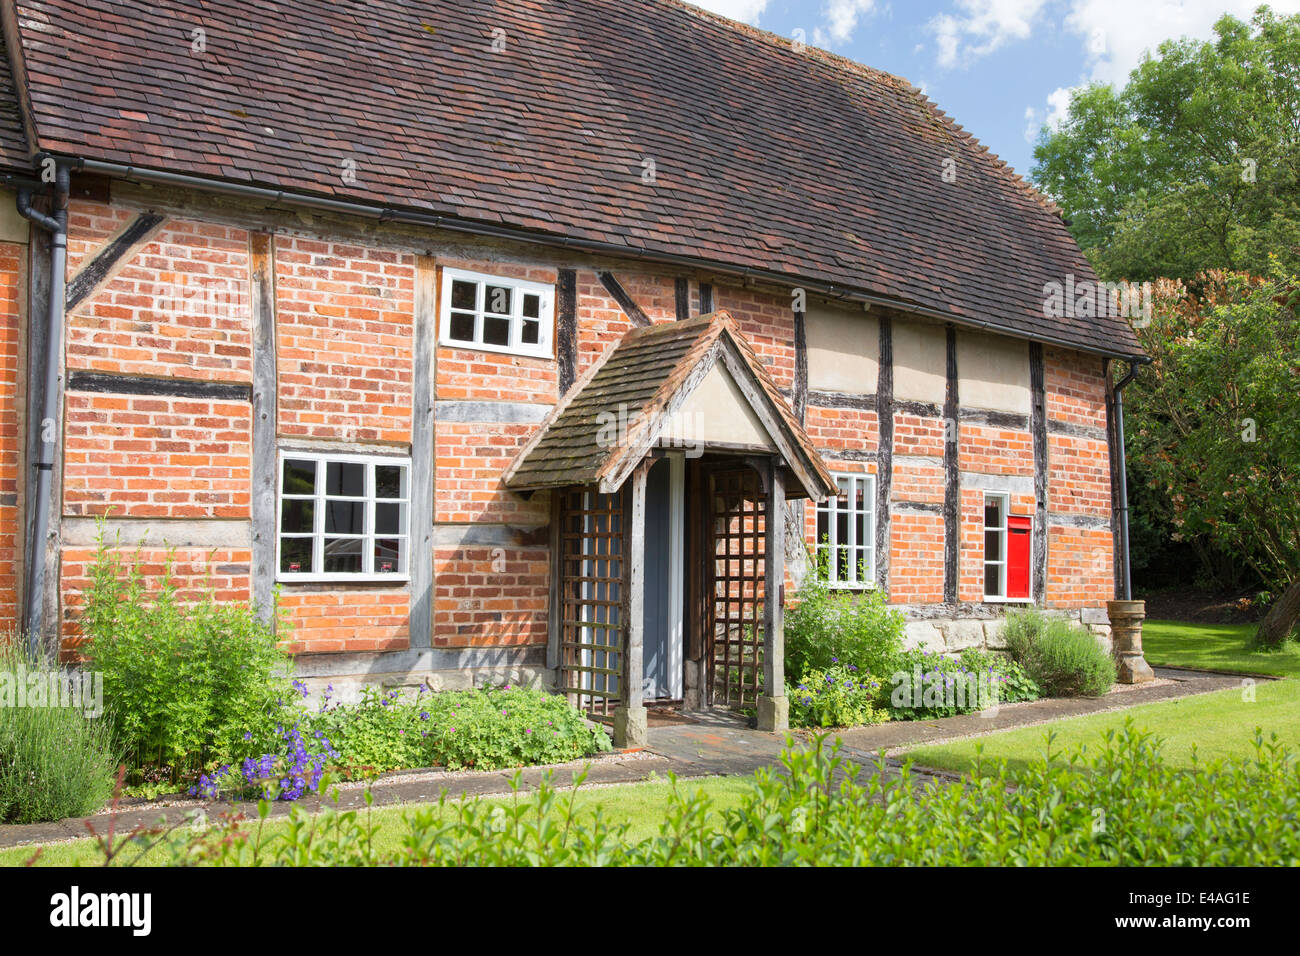 Traditional timber-framed cottage in the village of Lowsonford, Warwickshire, England, UK Stock Photo